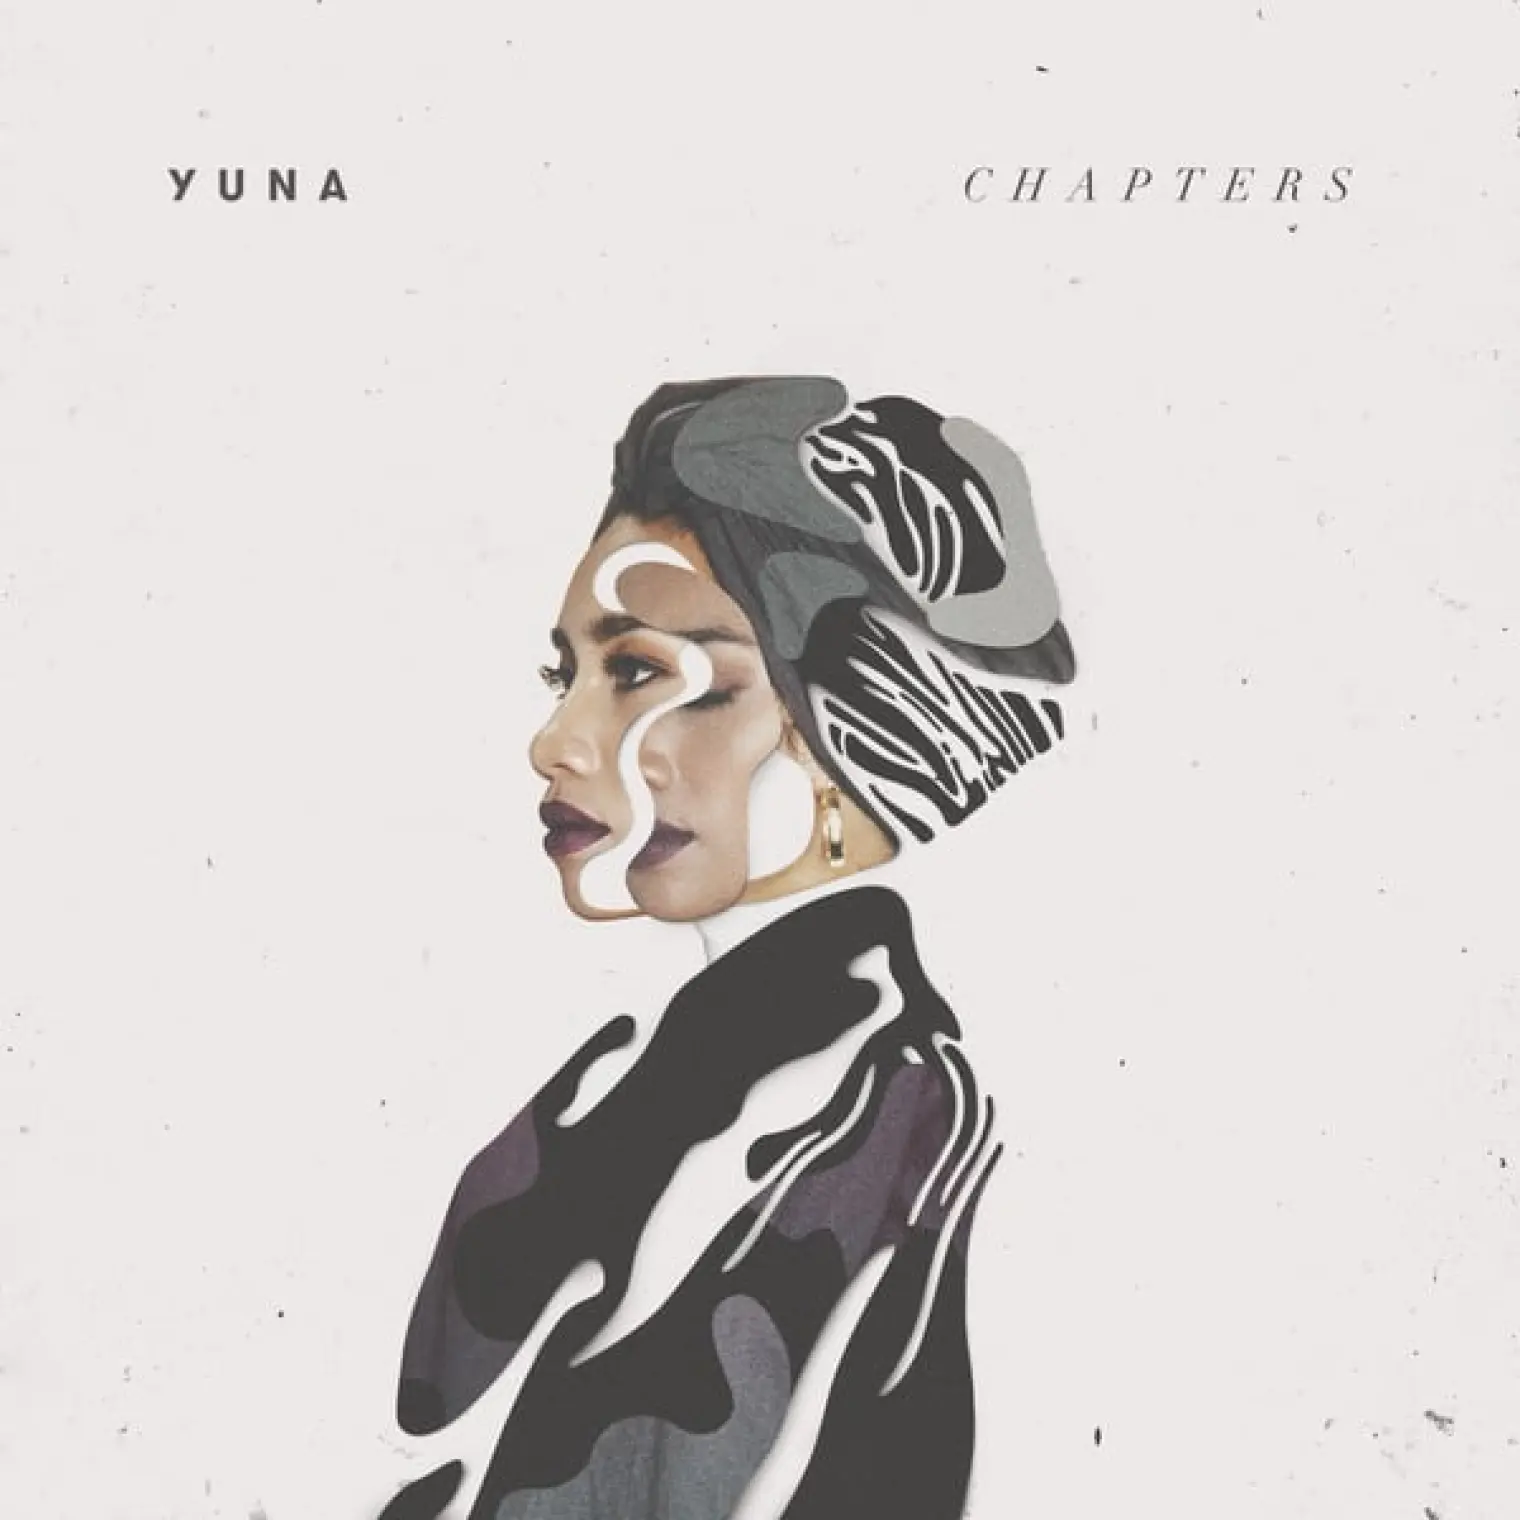 Chapters -  Yuna 